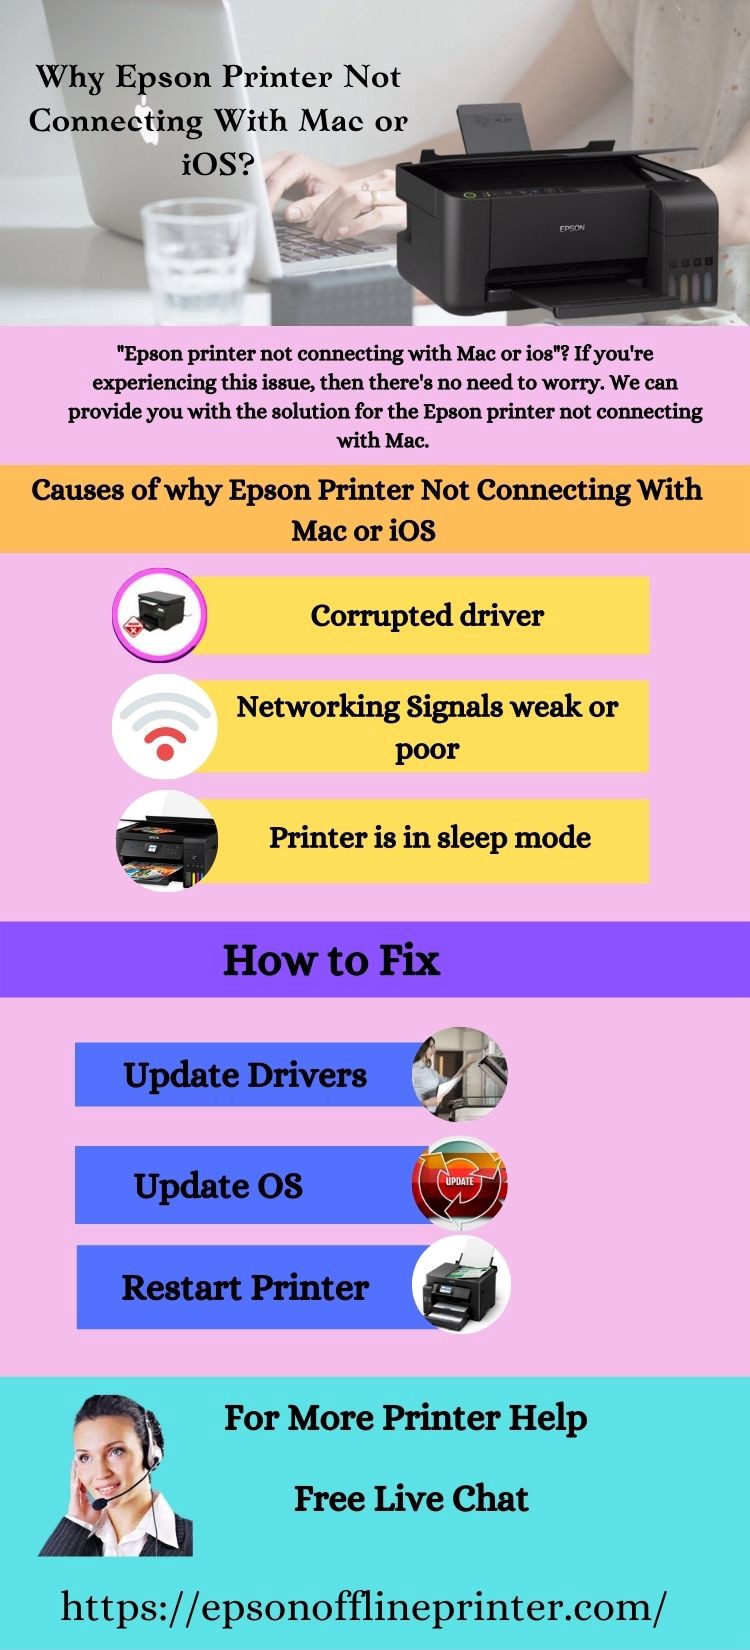 Troubleshooting “Epson Printer Not Connecting with Mac or iOS” Guide | by Robert cruse | Mar, 2022 | Medium